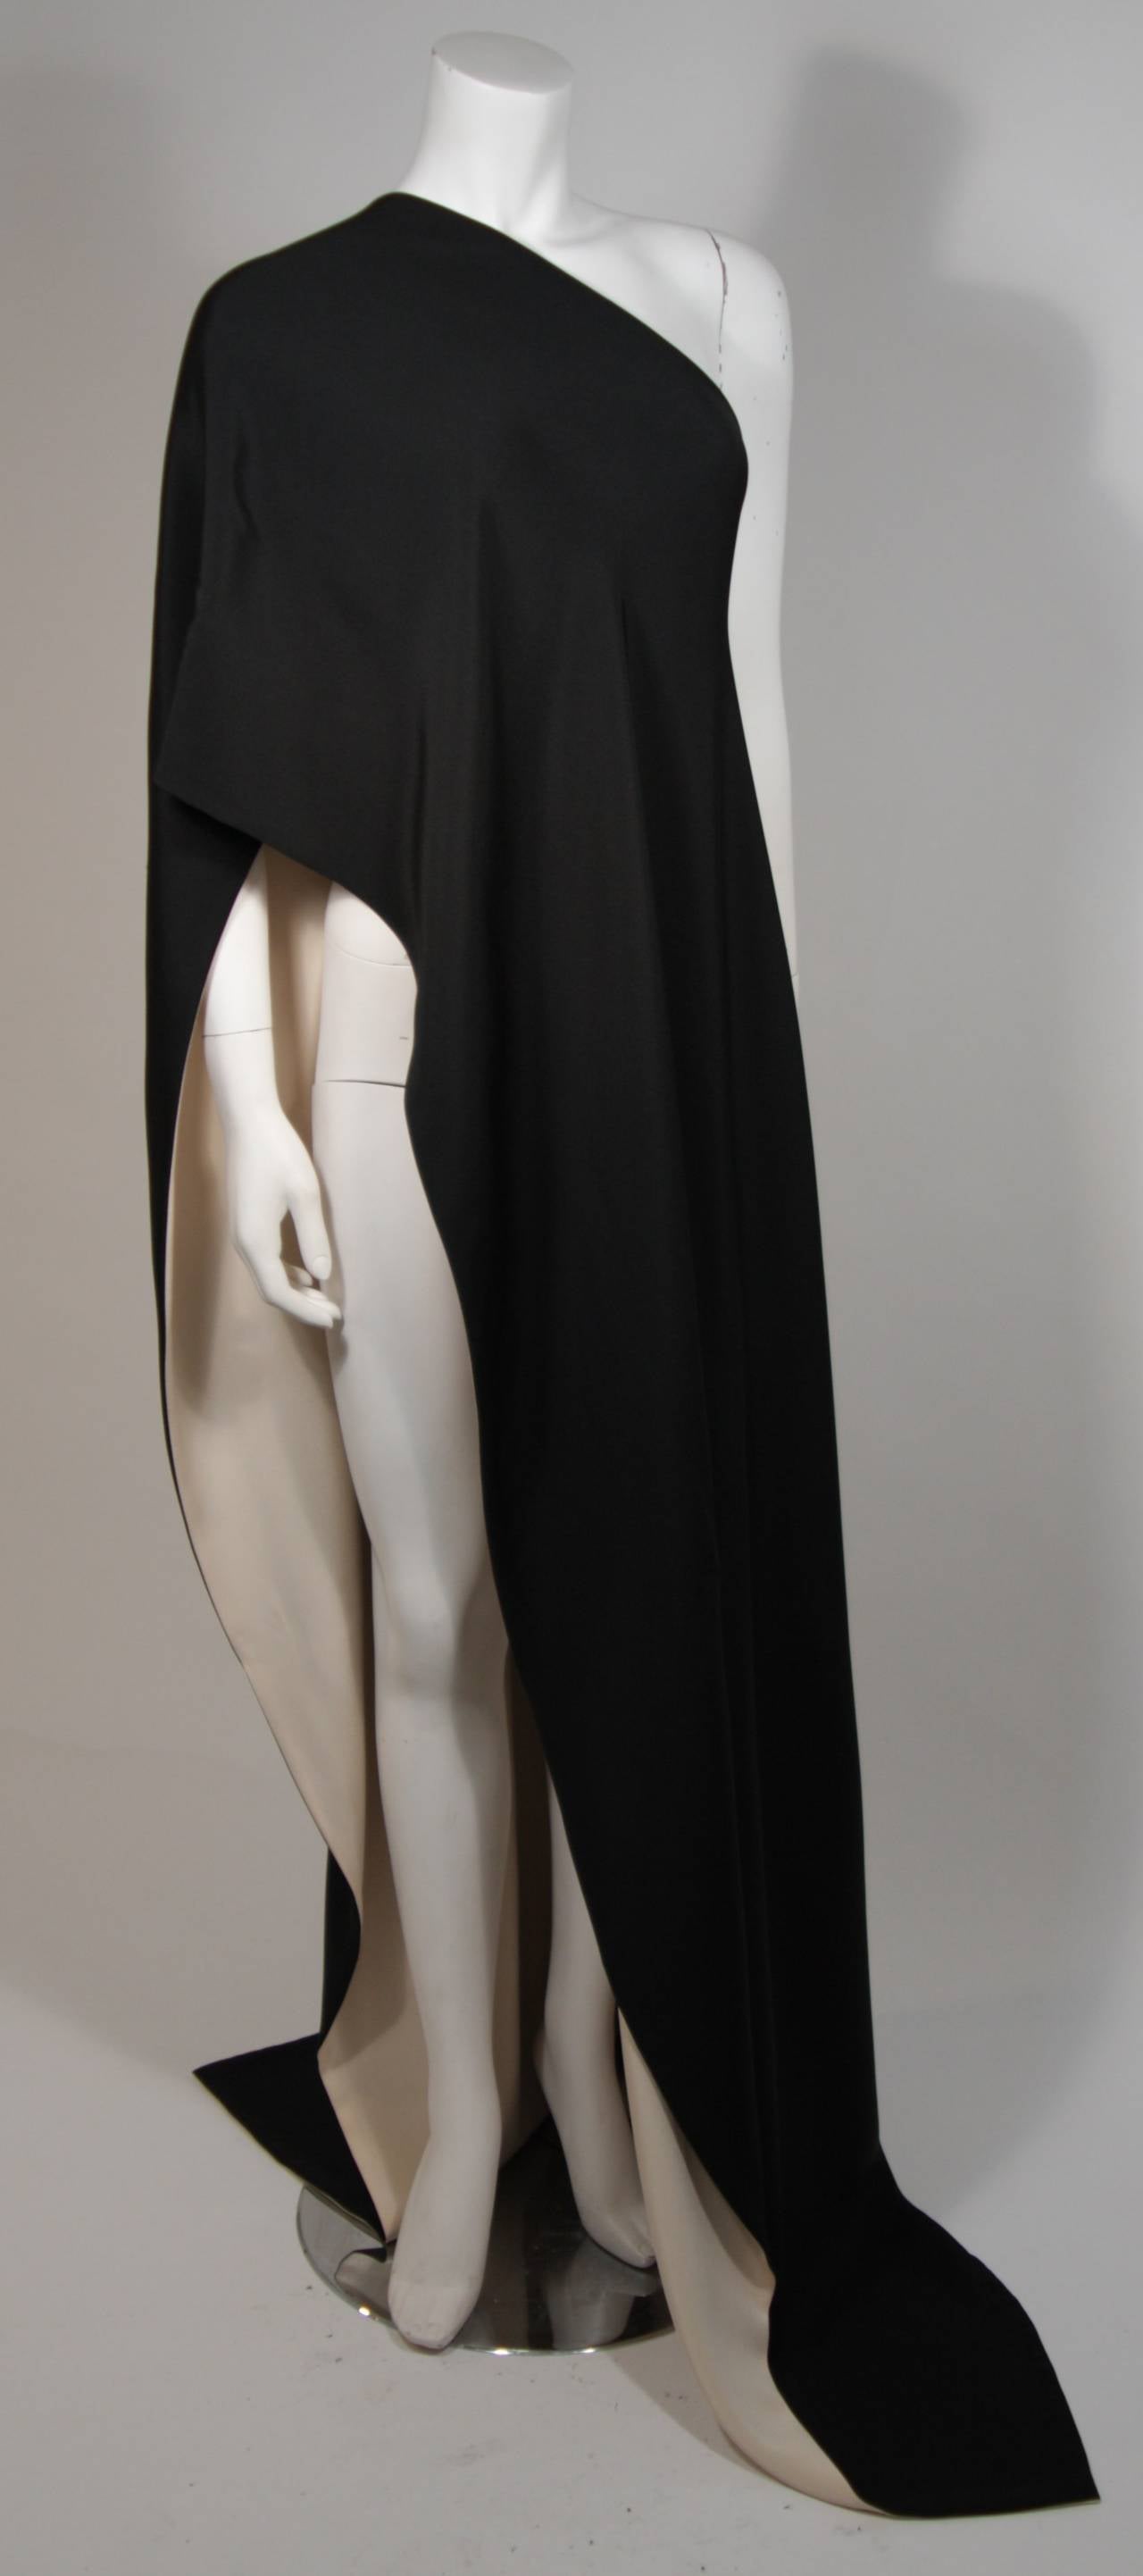 This Chanel design is available for viewing at our Beverly Hills Boutique. The drape style top is composed of a black silk and is lined with a cream silk. This piece is effortlessly chic and was made to be worn with the two black gowns we have